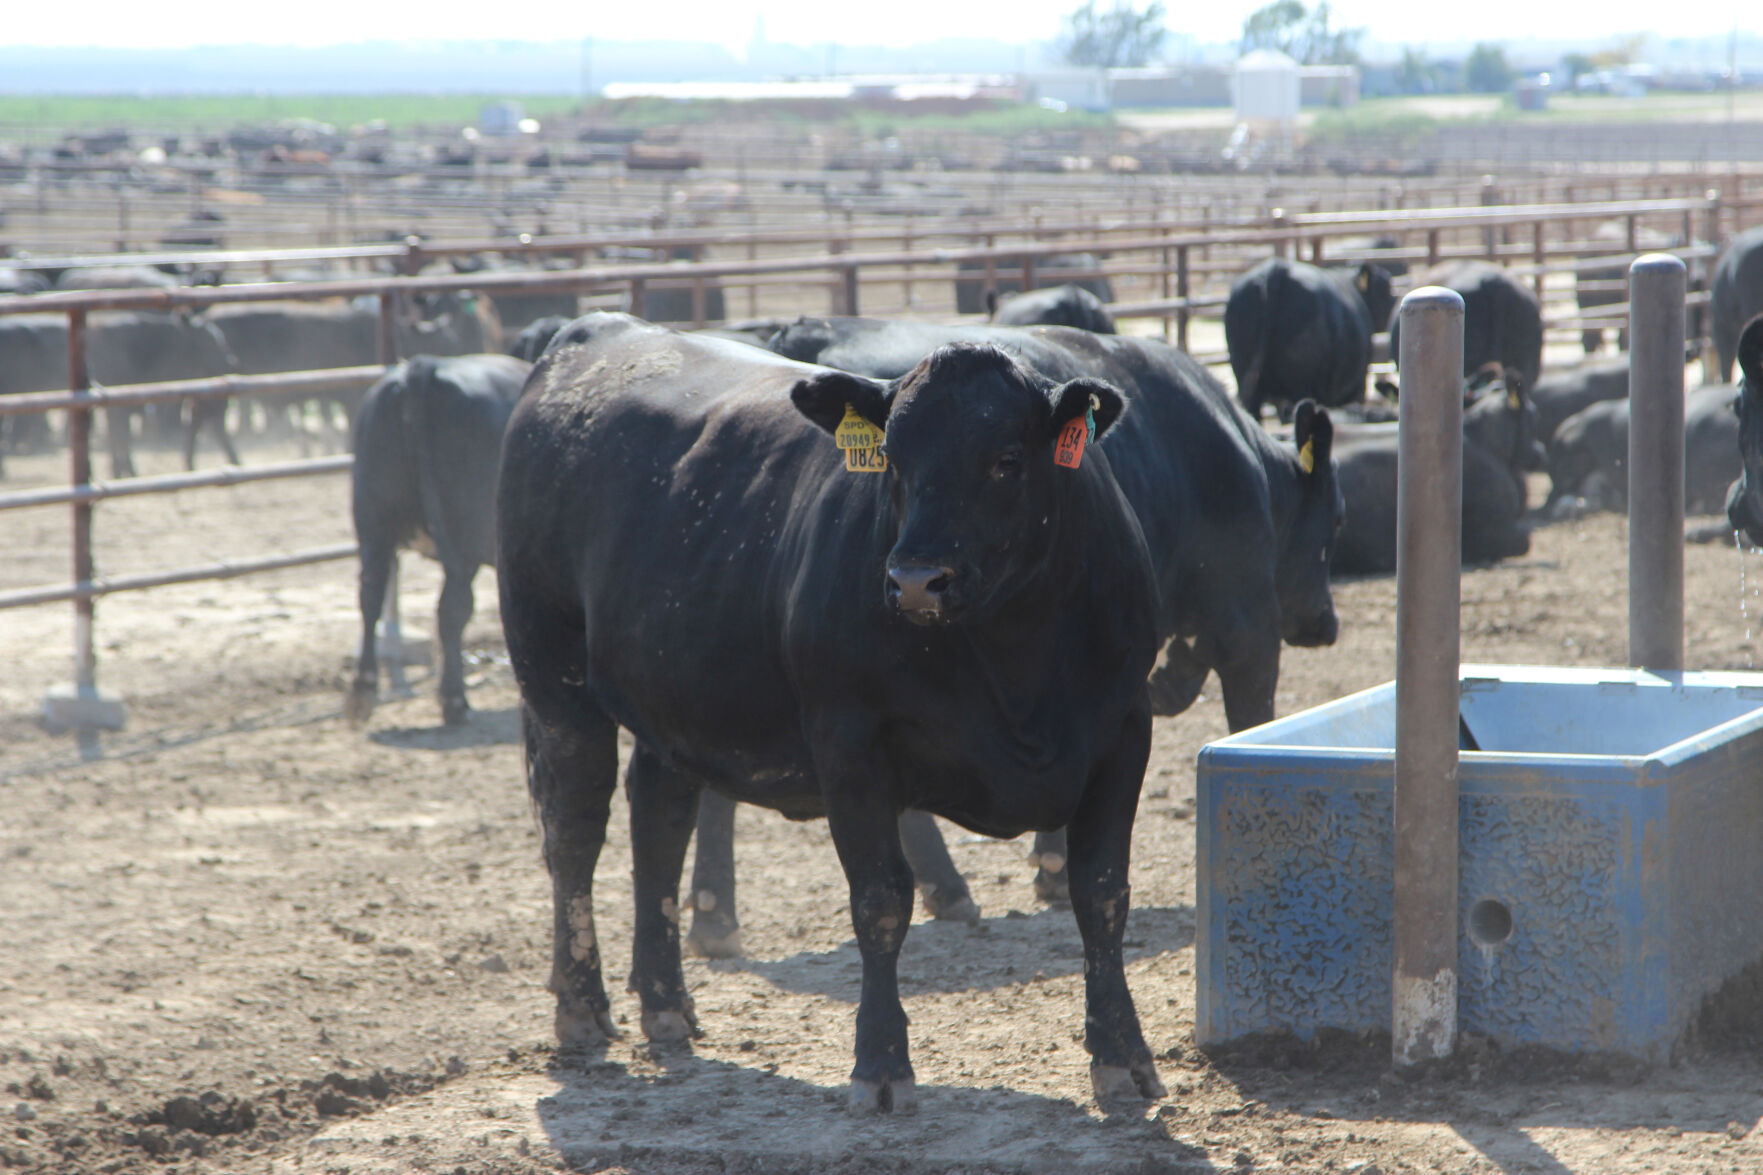 Feedyard cattle need acess to fresh, clean water during their stay in the yard. In times of extreme heat, high humidity or no wind, water becomes even more critical. (Journal photo by Kylene Scott.)